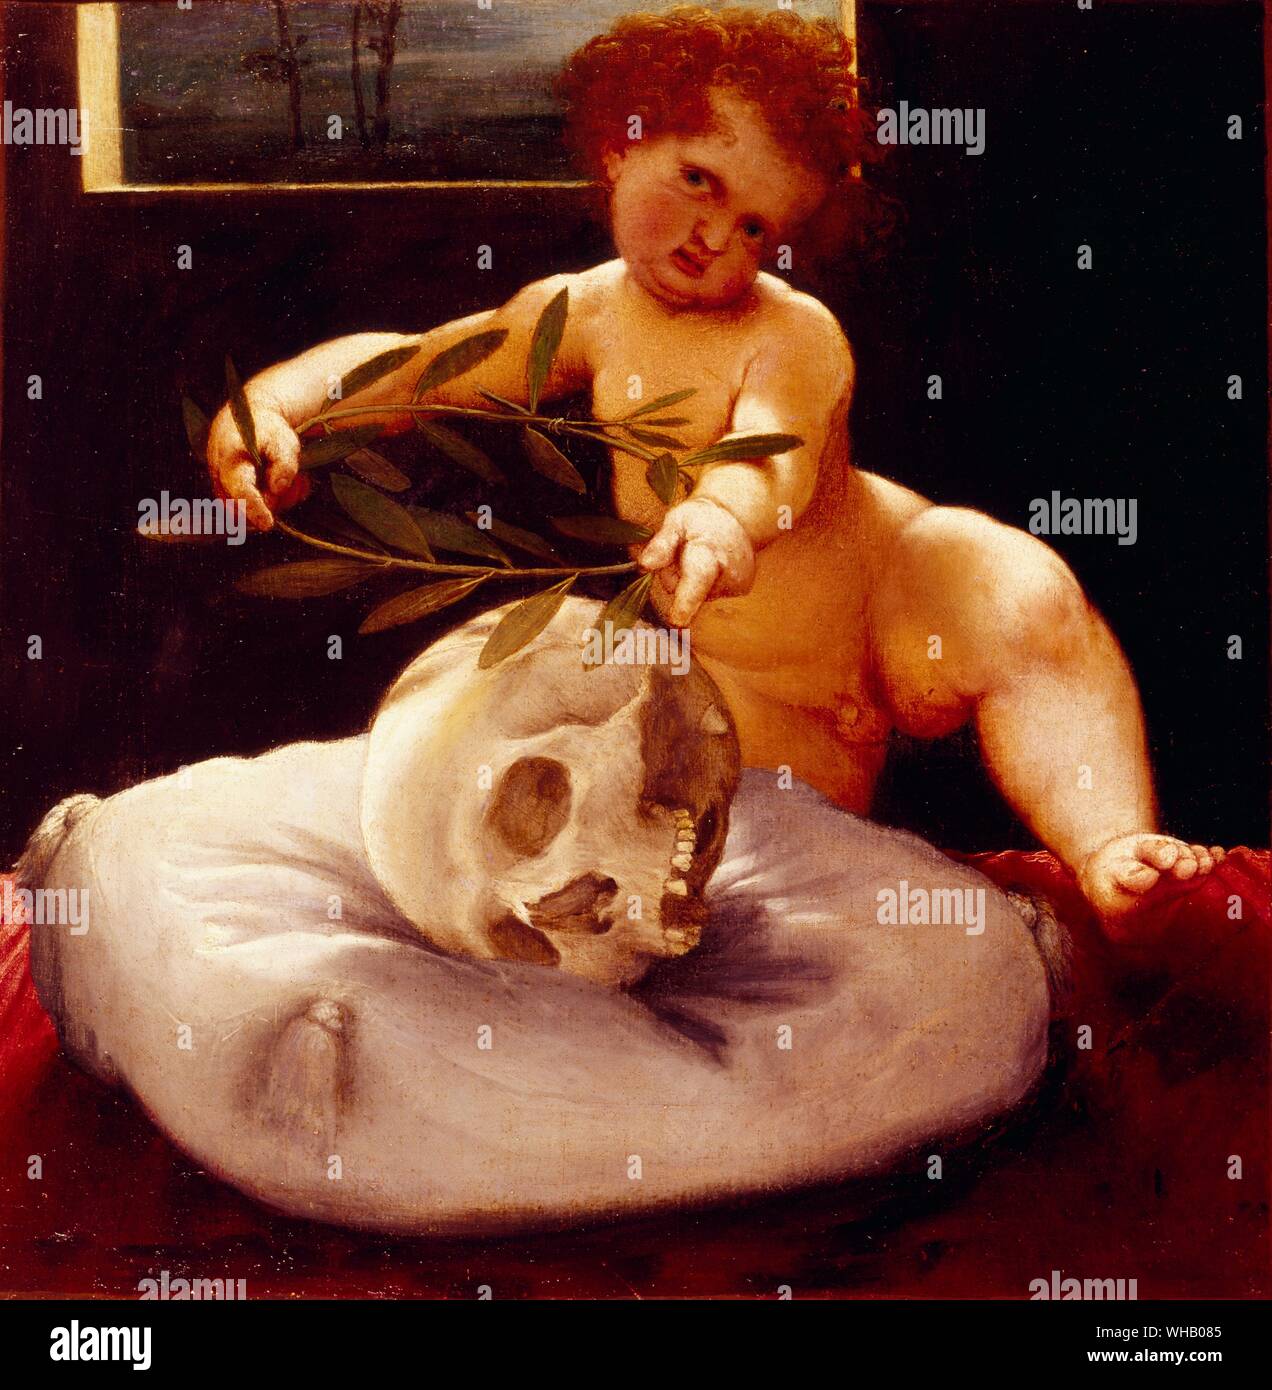 Cherub with a Skull. by Lorenzo Lotto. Alnwick Castle. Lorenzo Lotto (c.1480 - 1556) was an Italian painter active during the Renaissance. Born in Venice, he worked in Venice, Rome, Bergamo and possibly Tuscany. He trained in the studio of Giovanni Bellini, along with Giorgione and Titian. In 1552 he entered the Holy Sanctuary at Loreto, becoming a lay brother. Lotto's work is characterized by a mixture of Venetian and northern European styles. He is most noted for his portraits. His work includes:. Stock Photo